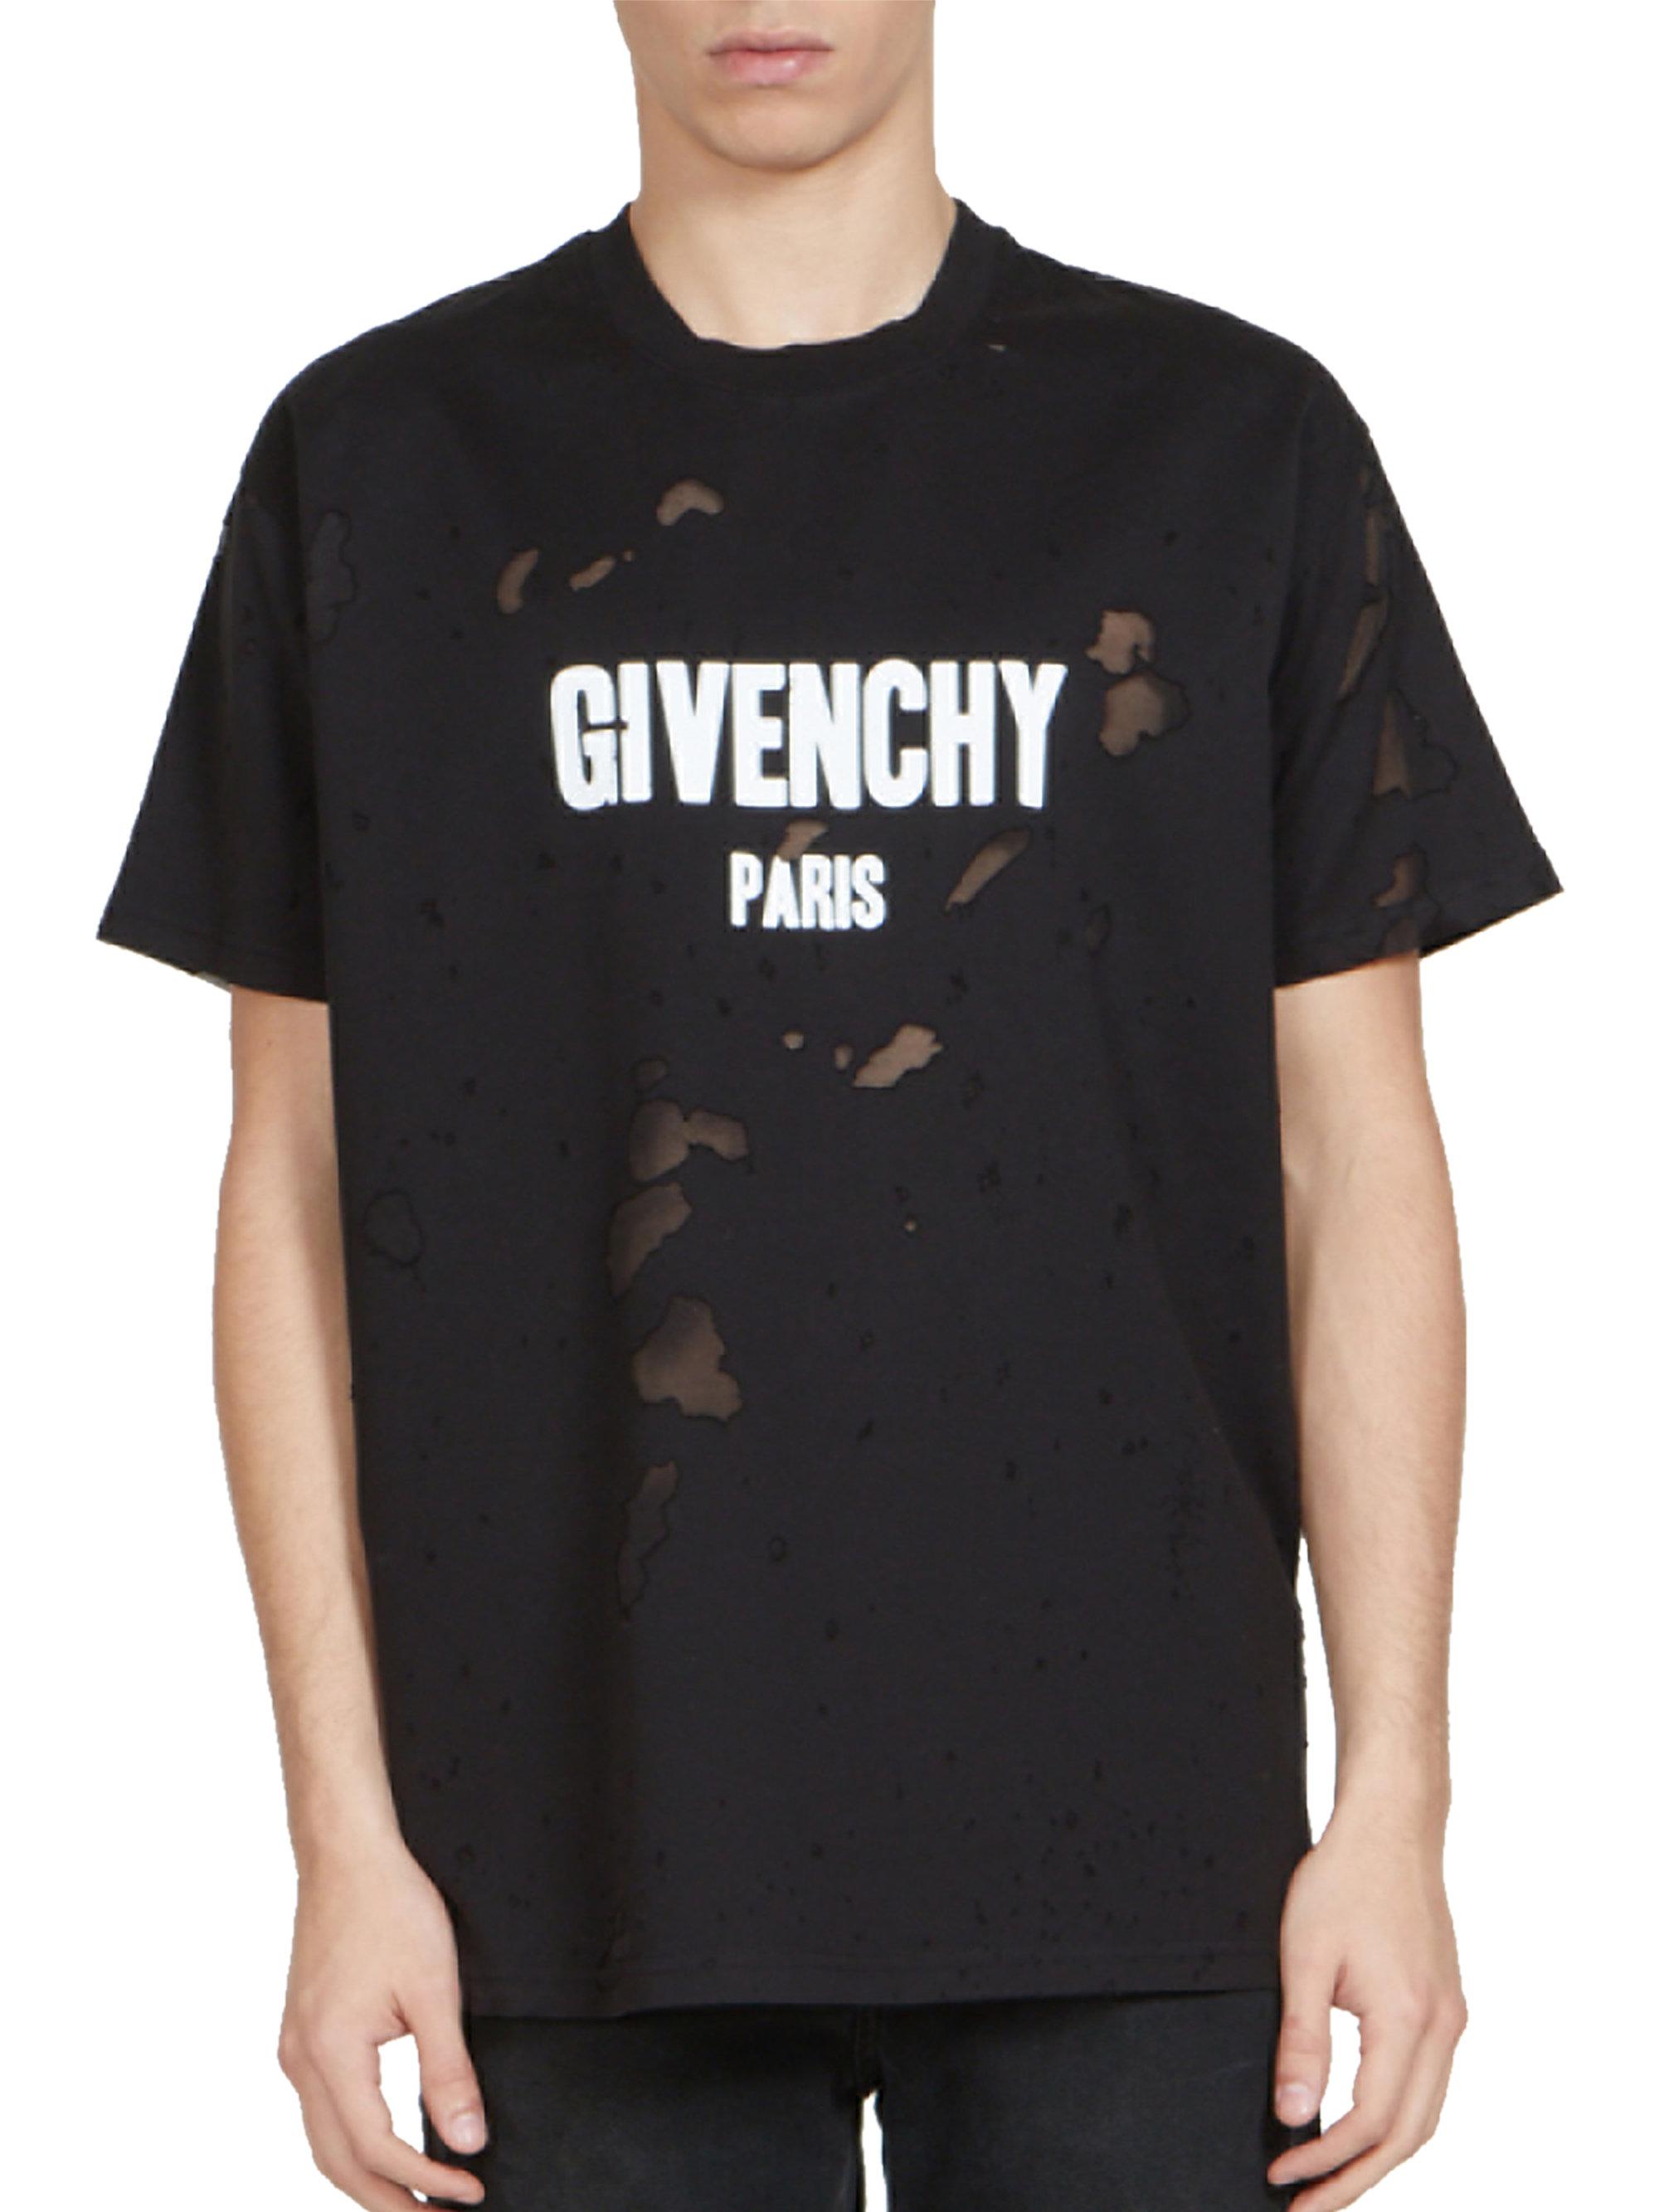 Givenchy Cotton Destroyed Logo Tee in Black for Men - Lyst